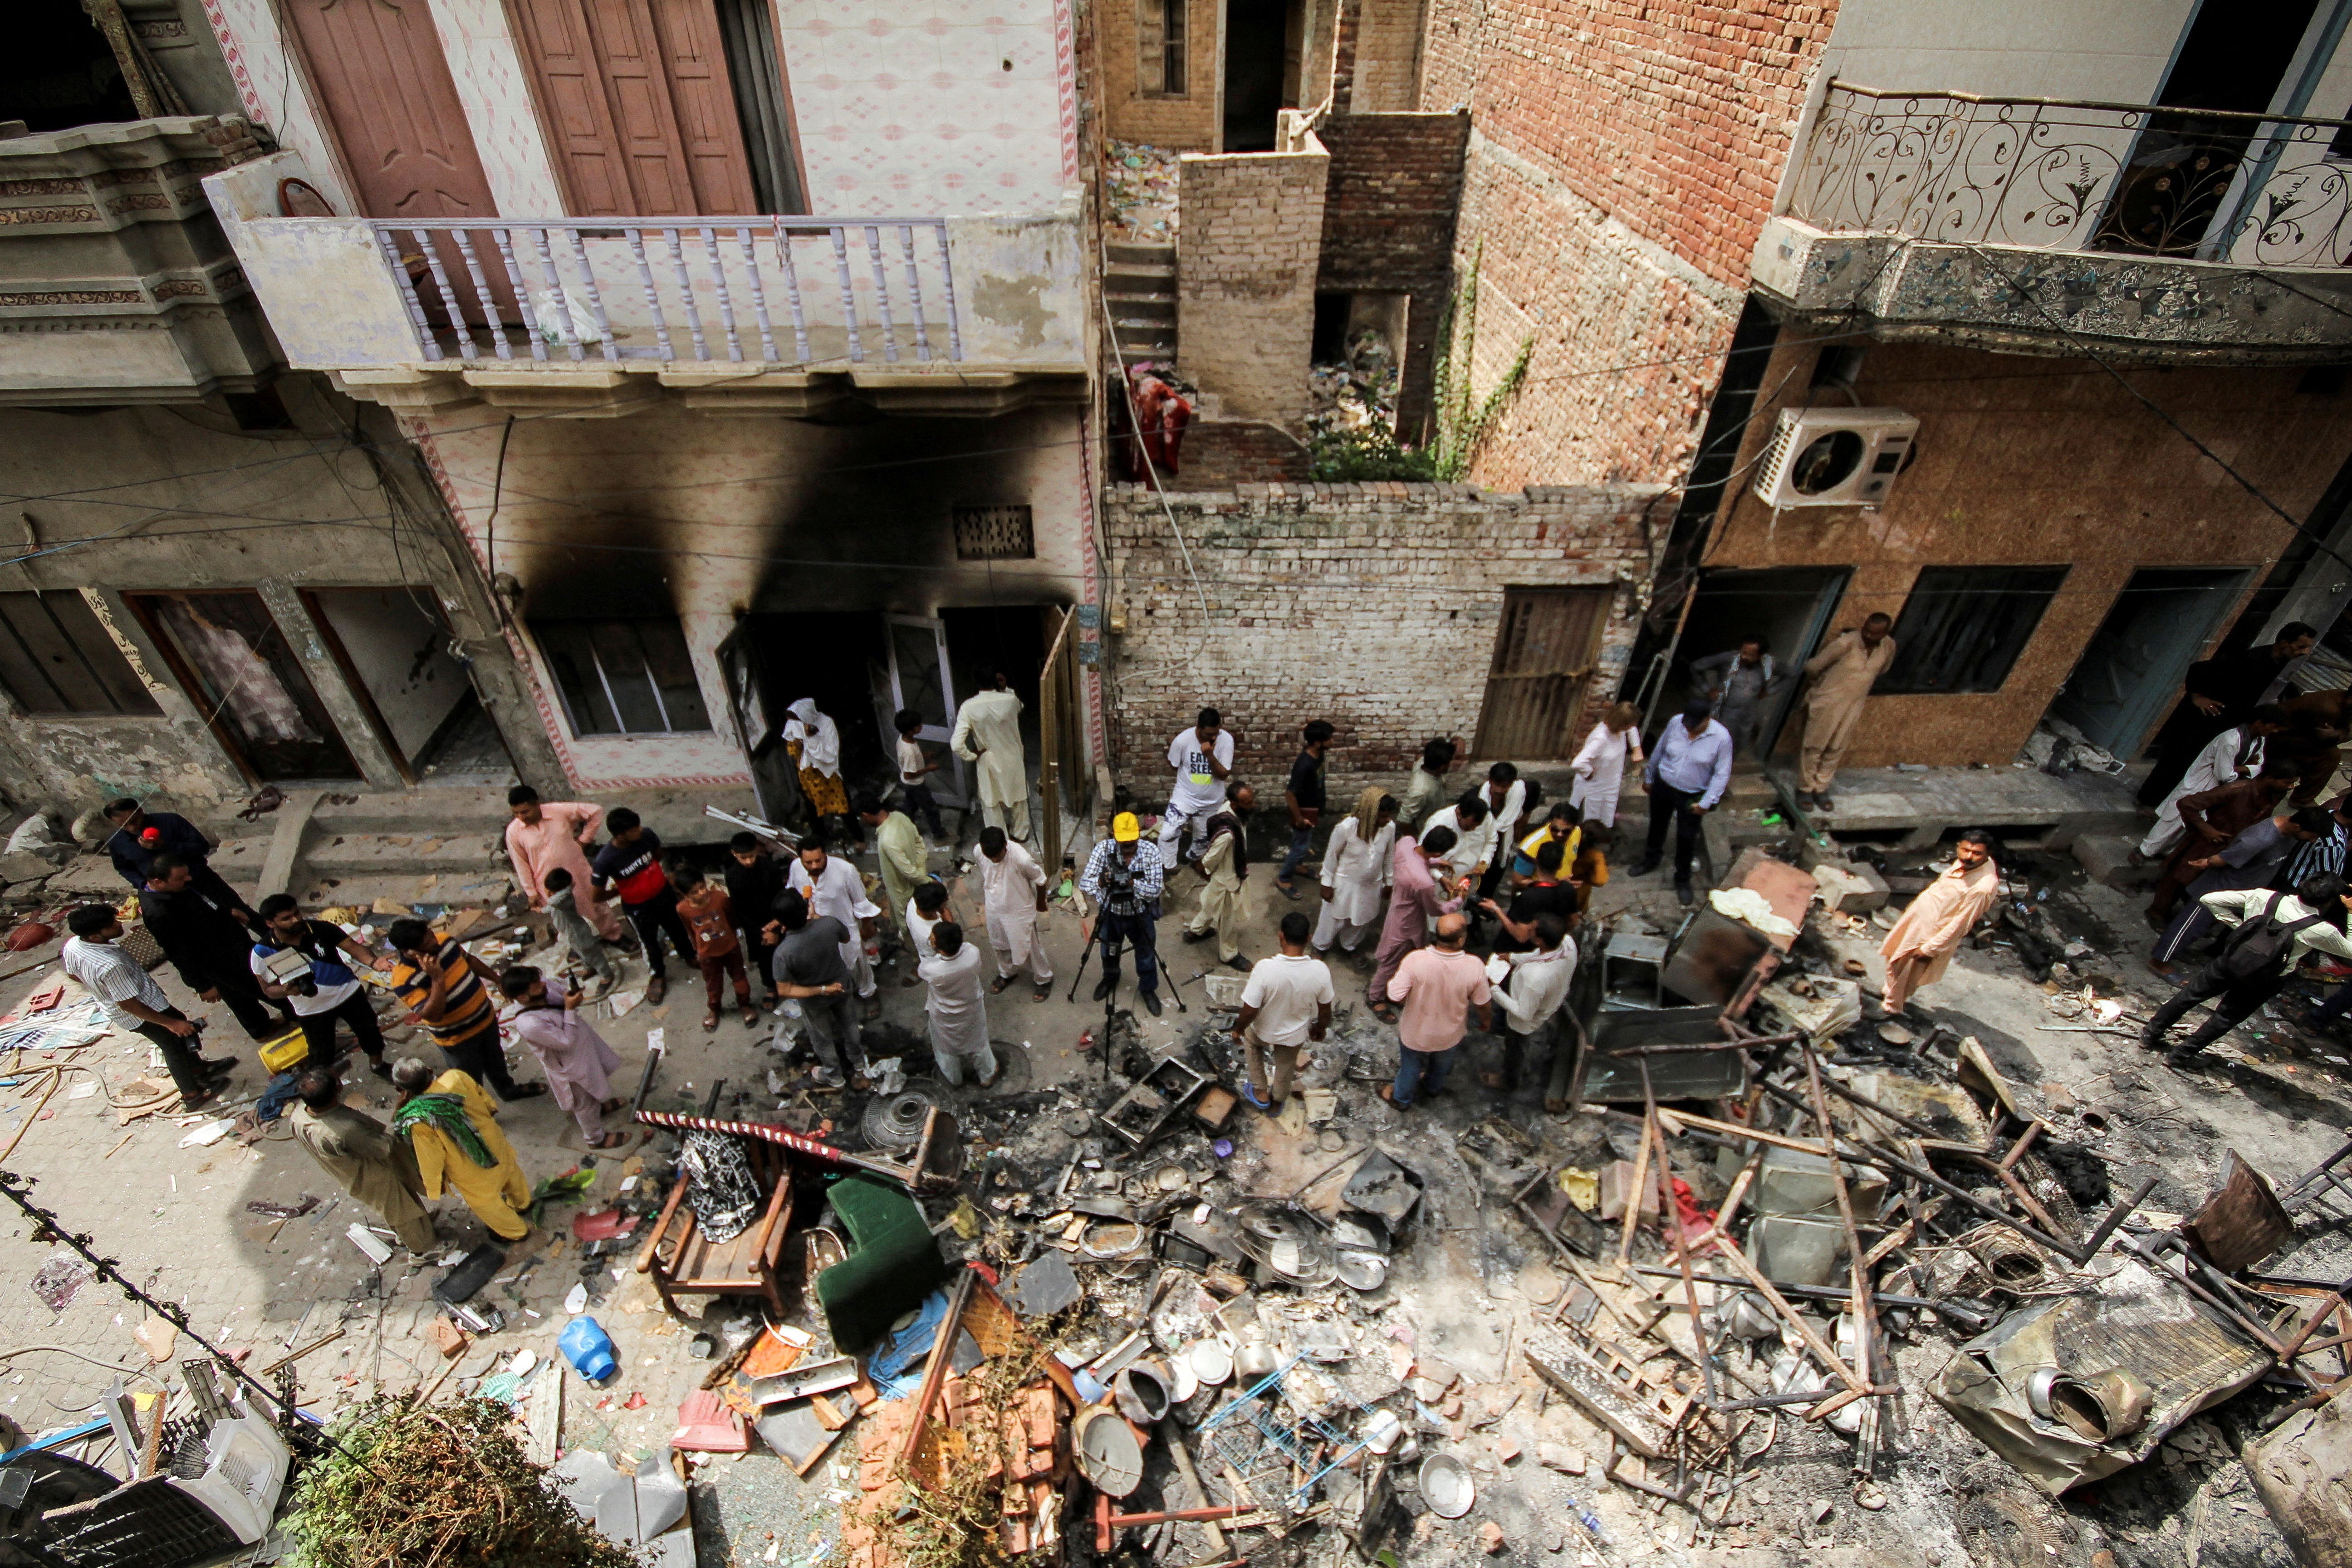 Onlookers and media representatives gather along a street in a Christian neighbourhood, a day after the church buildings and houses were vandalised by protesters in Jaranwala